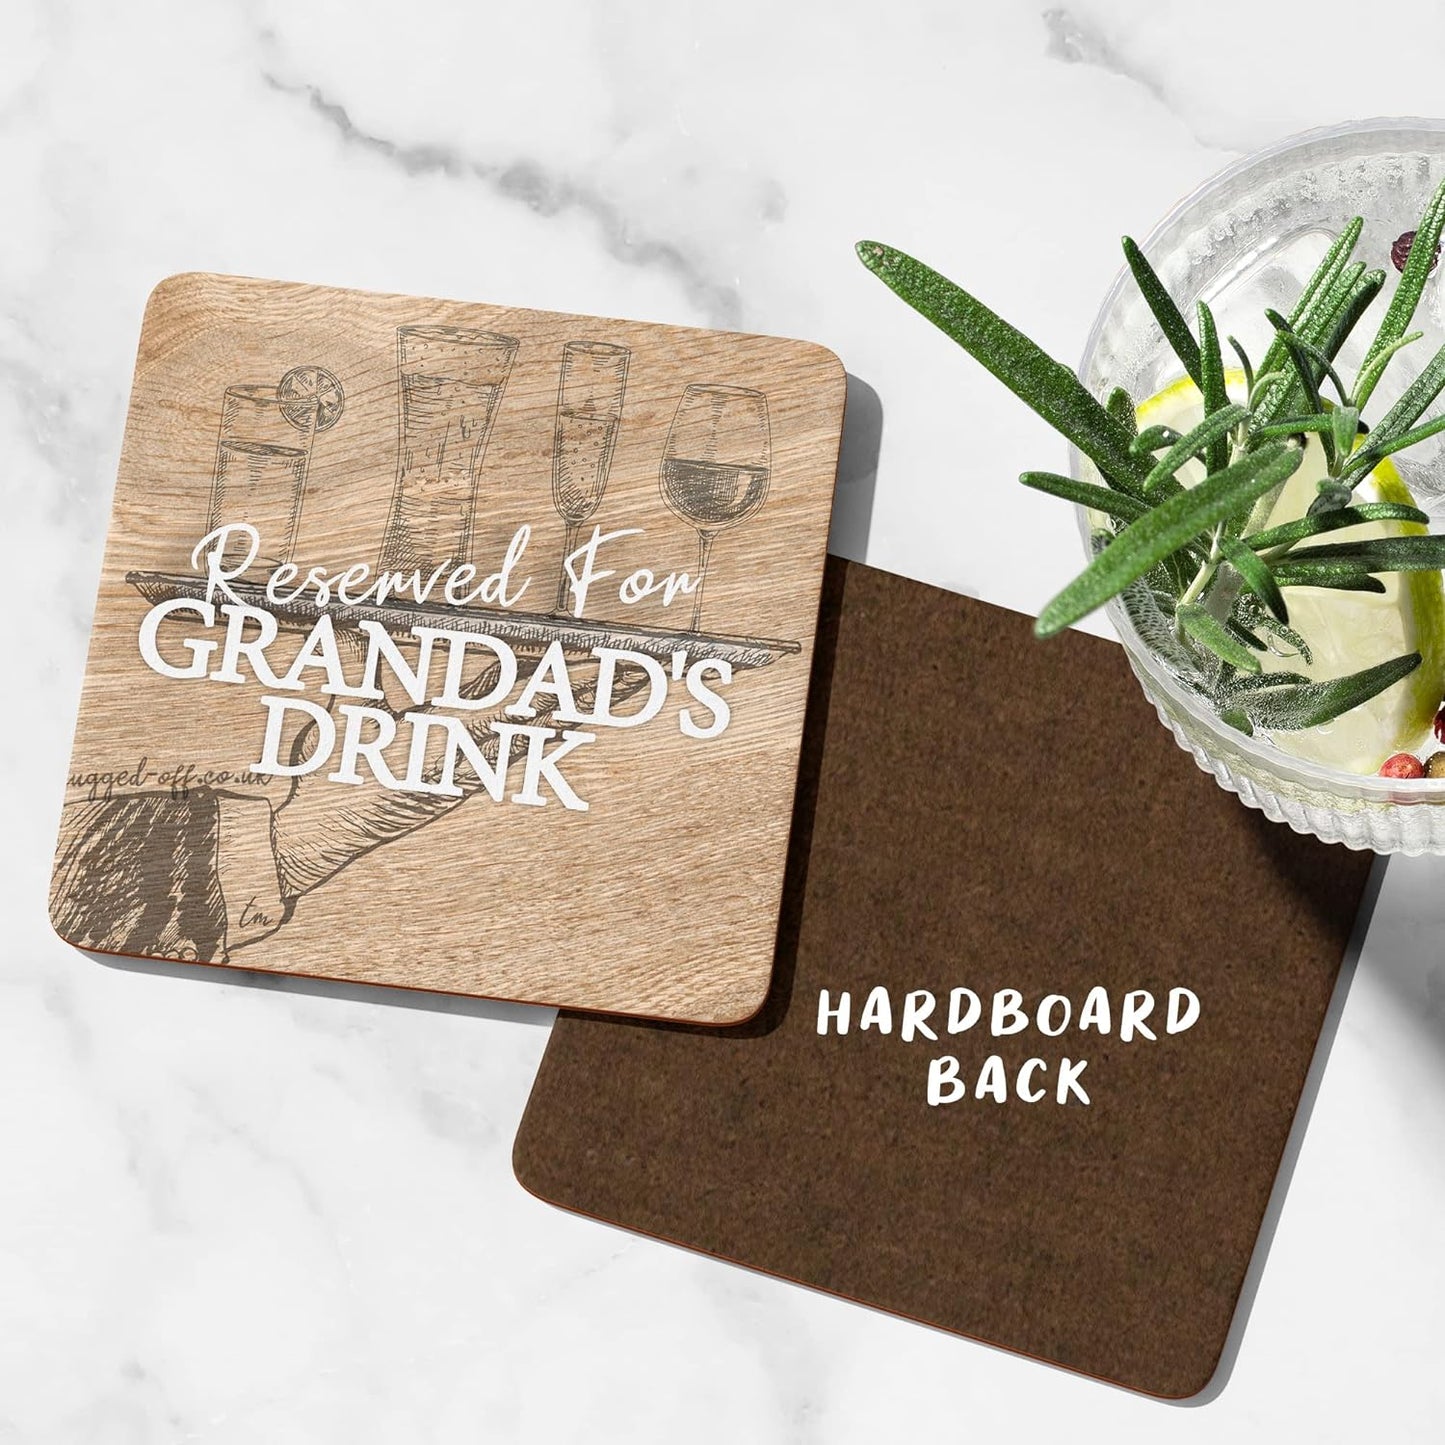 Grandad Gifts Ideal For Grandad Fathers Day Wood Effect Coaster Reserved For Grandad's Drink Gifts Grandad